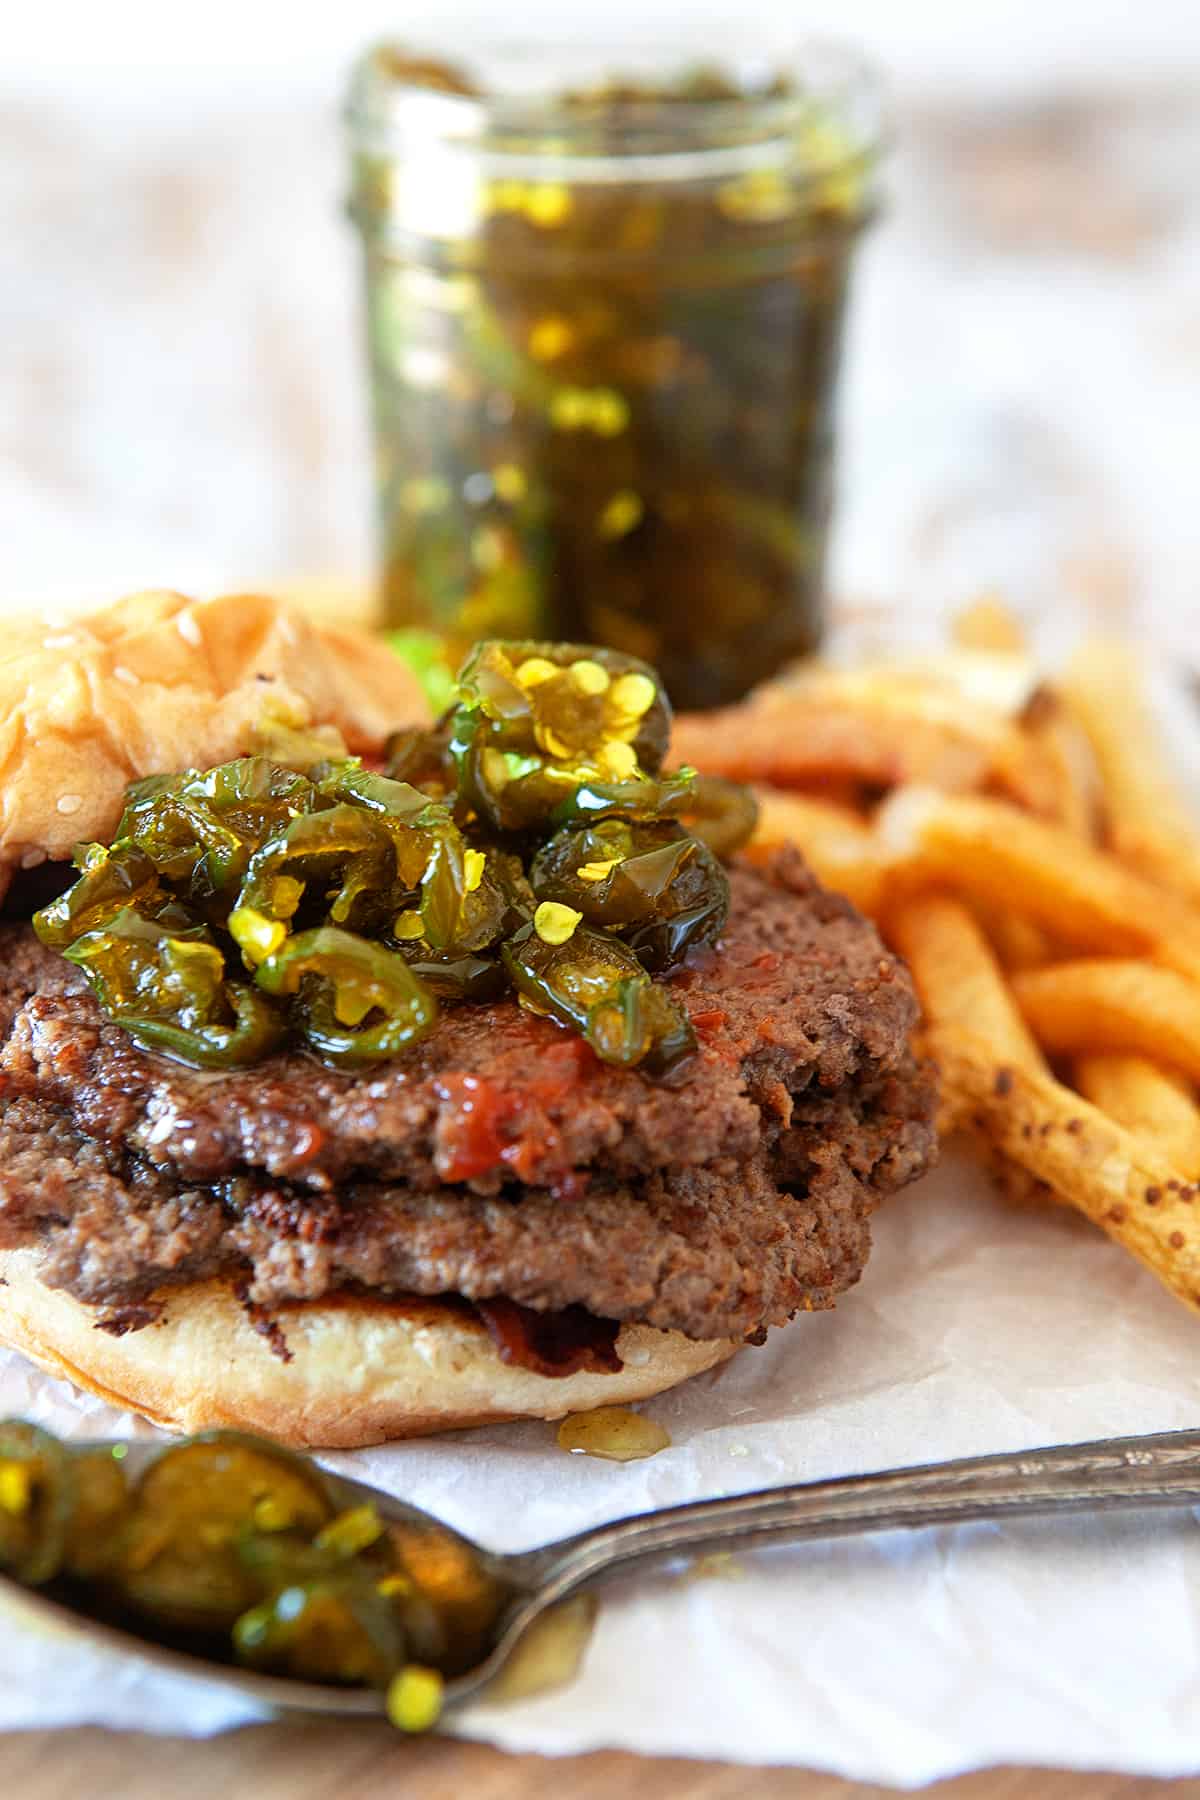 Showing candied jalapenos on top of burgers. 